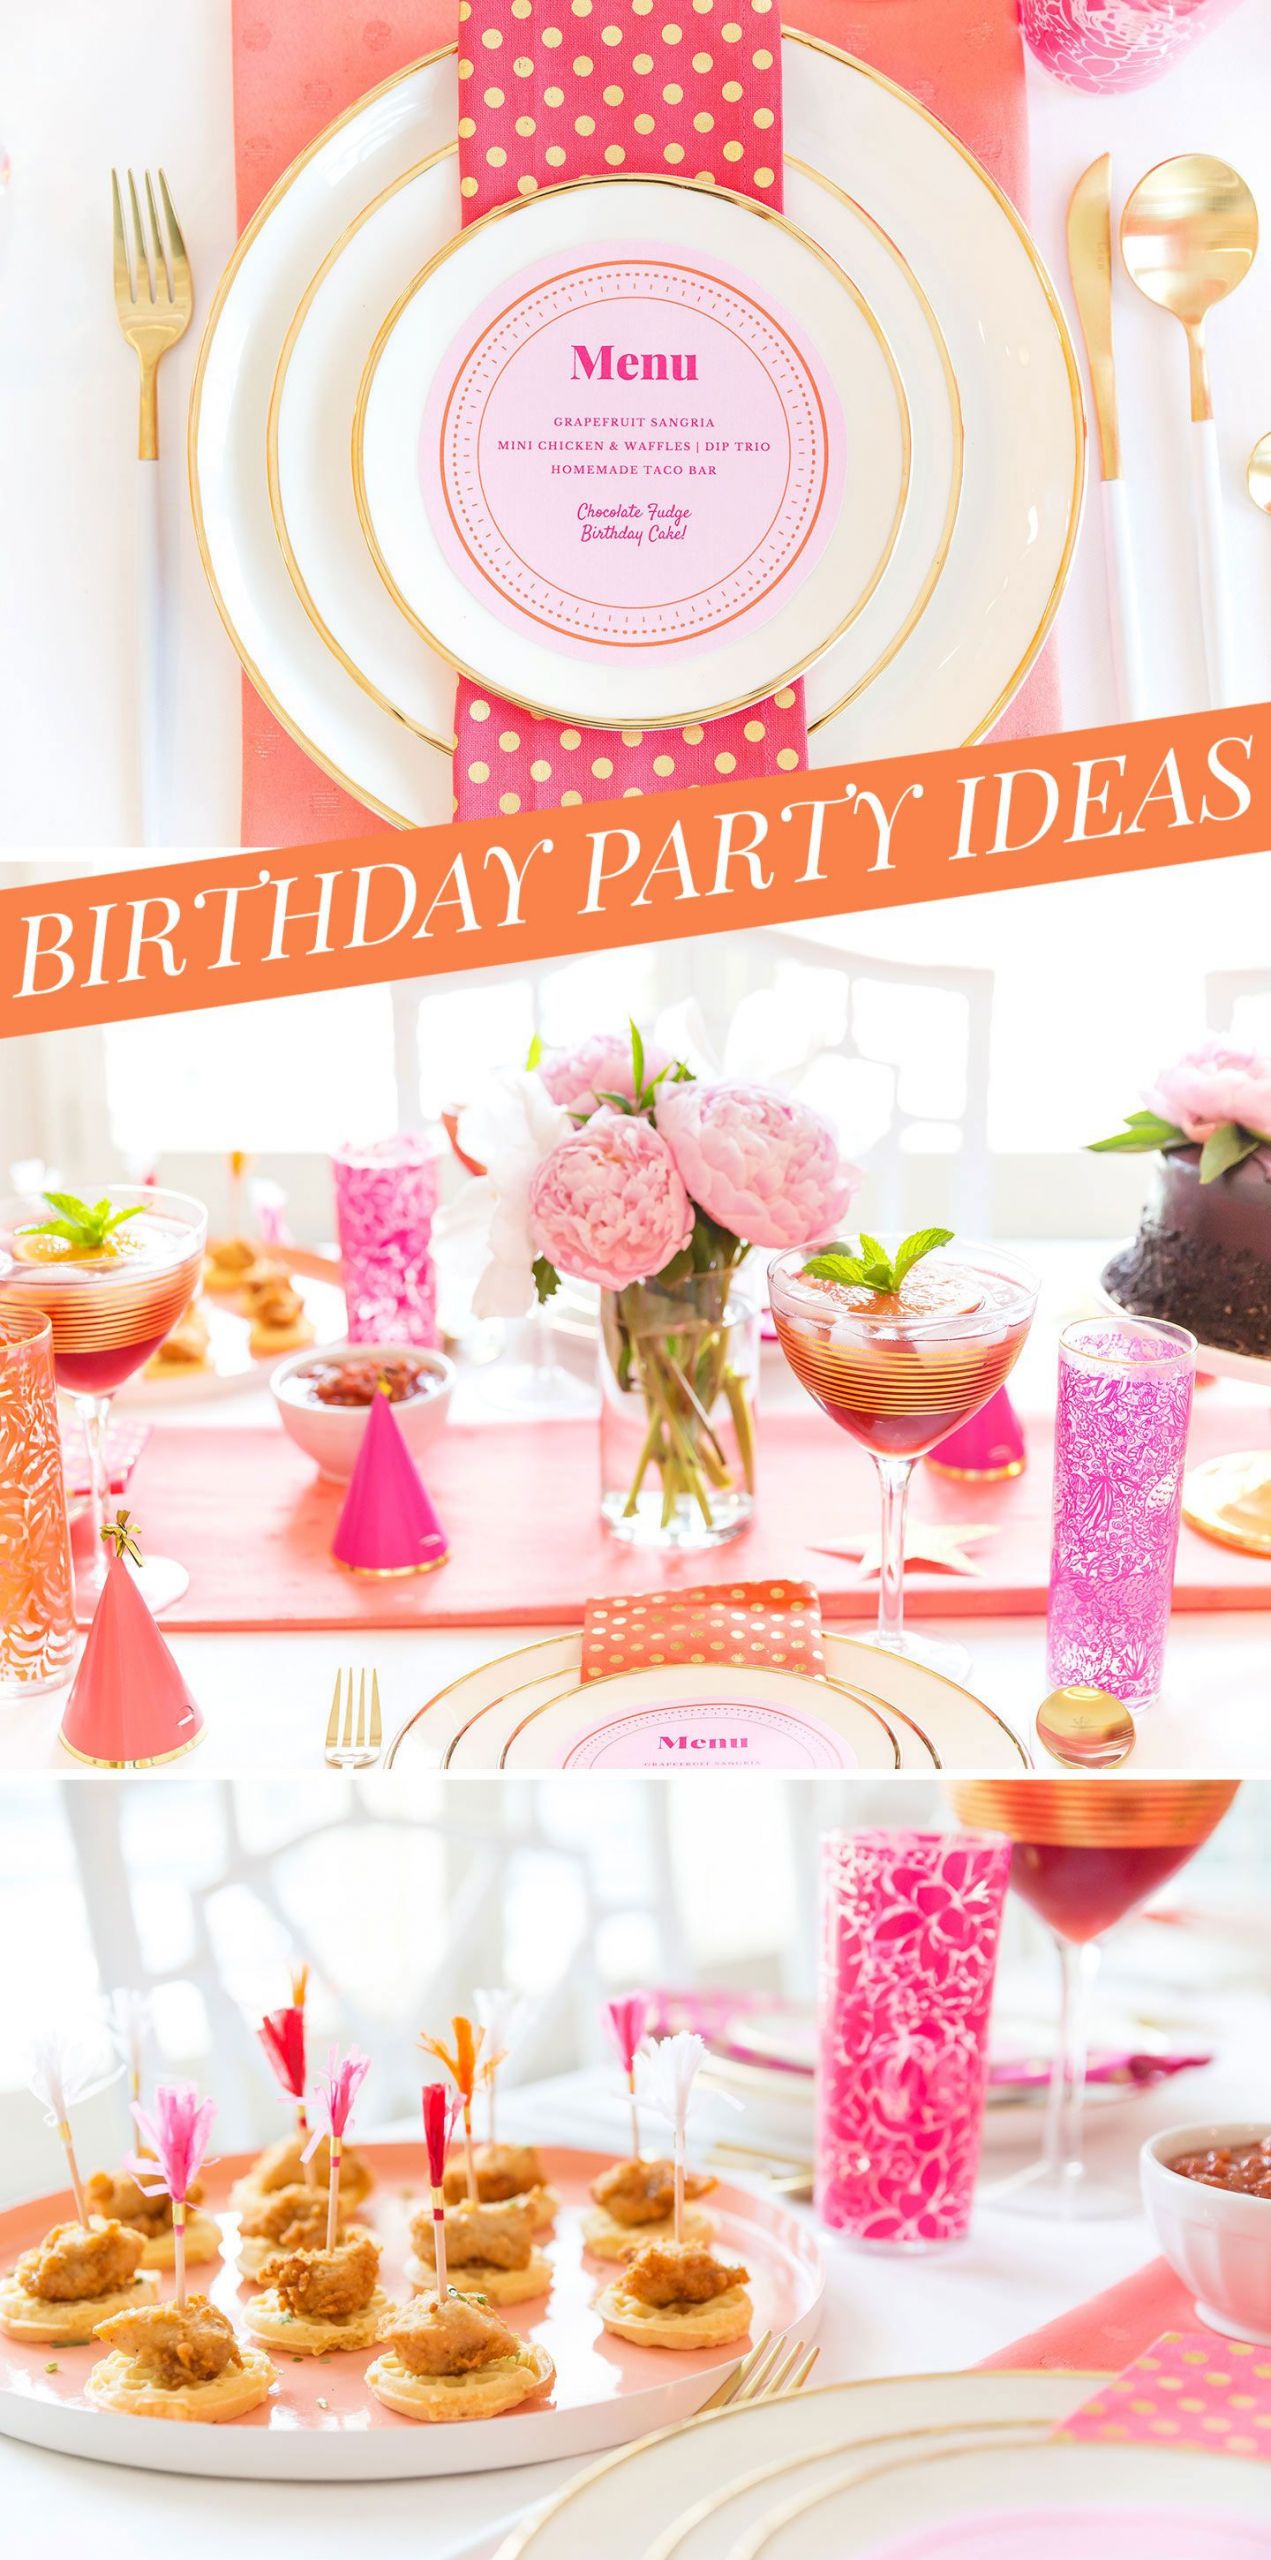 Birthday Craft Ideas For Adults
 Fun Birthday Party Ideas for Adults